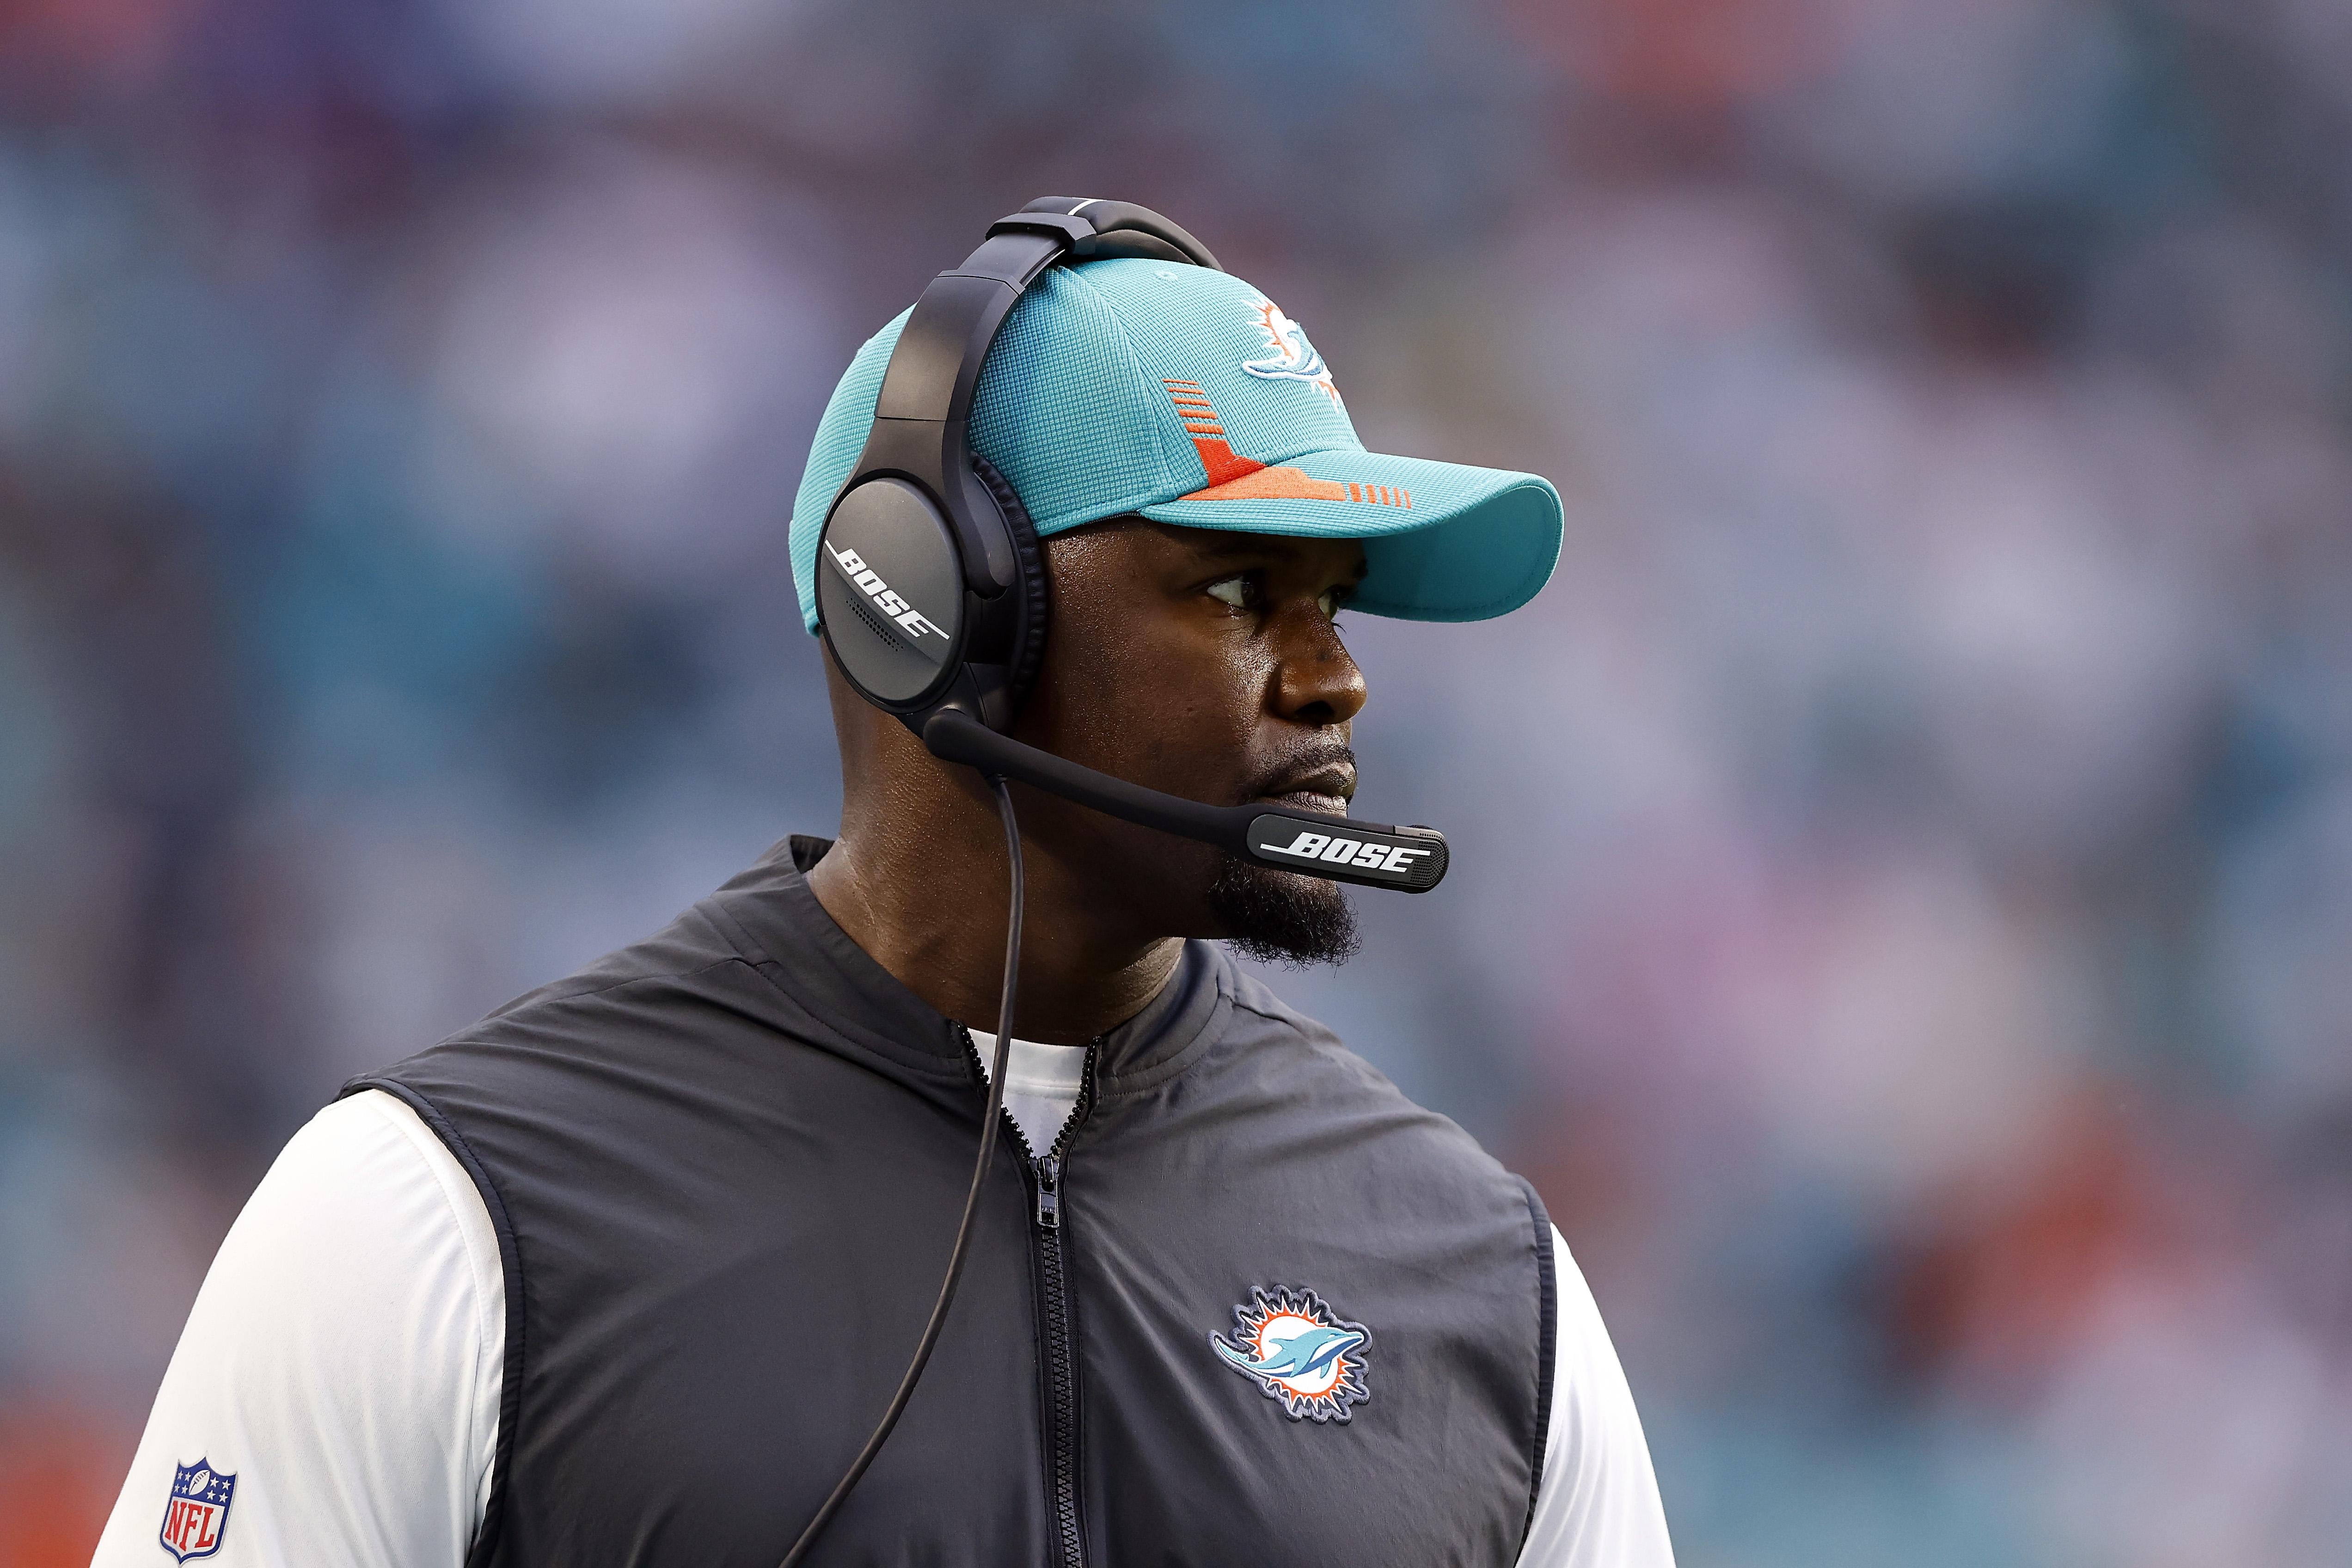 Flores with a Miami Dolphins hat and headset on, on the sidelines.